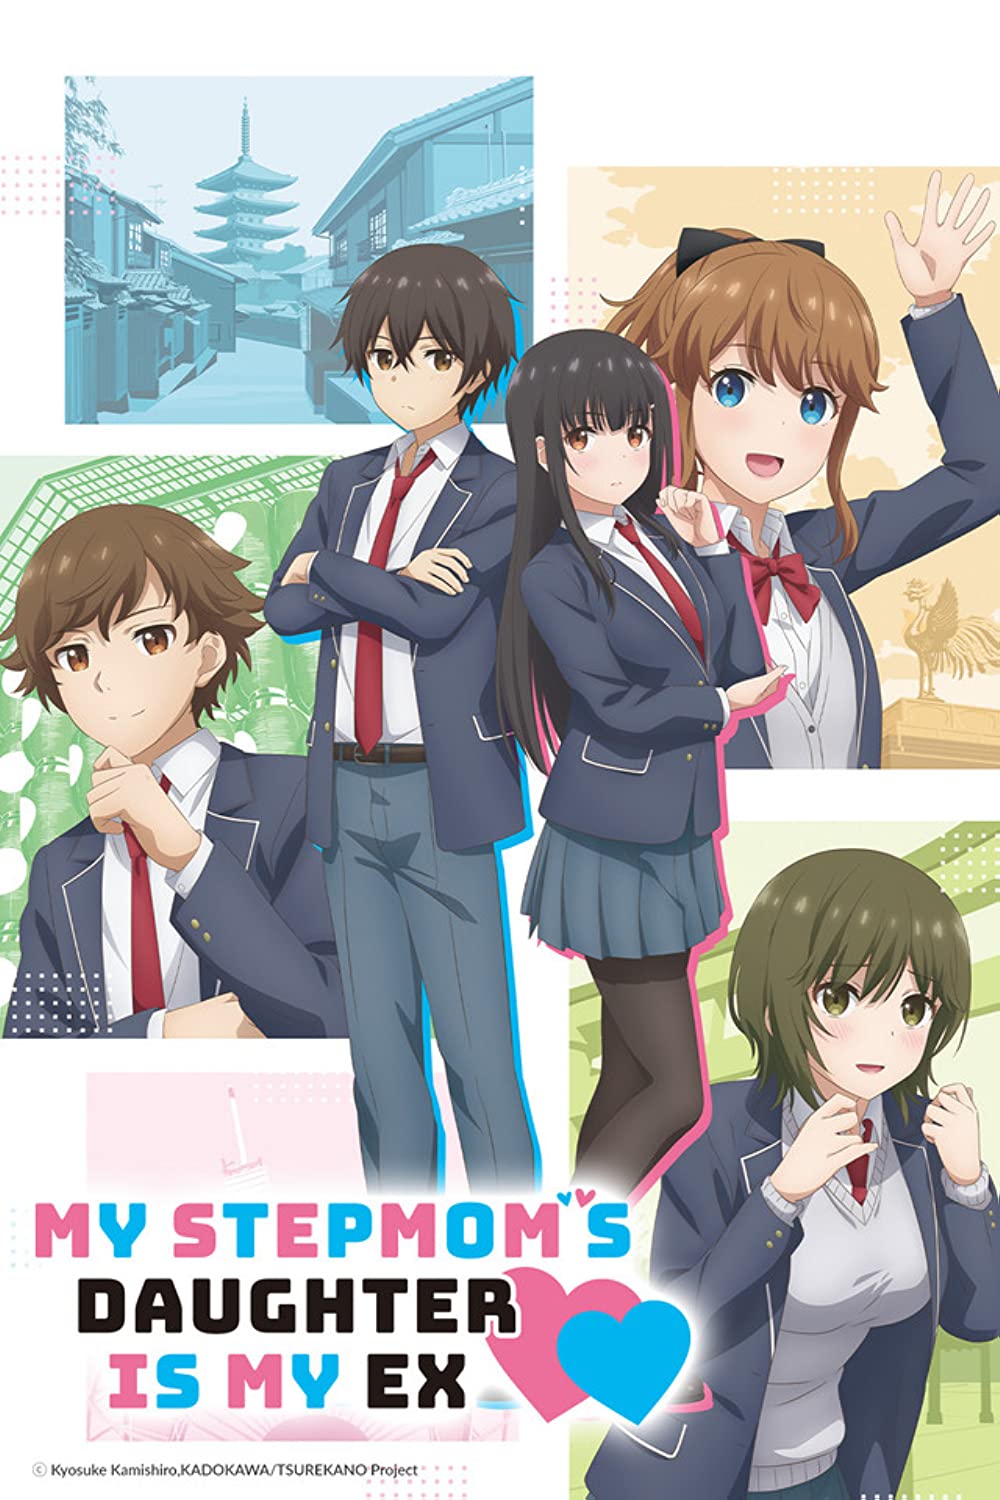 My Stepmom's Daughter Is My Ex Reveals Preview for Episode 10